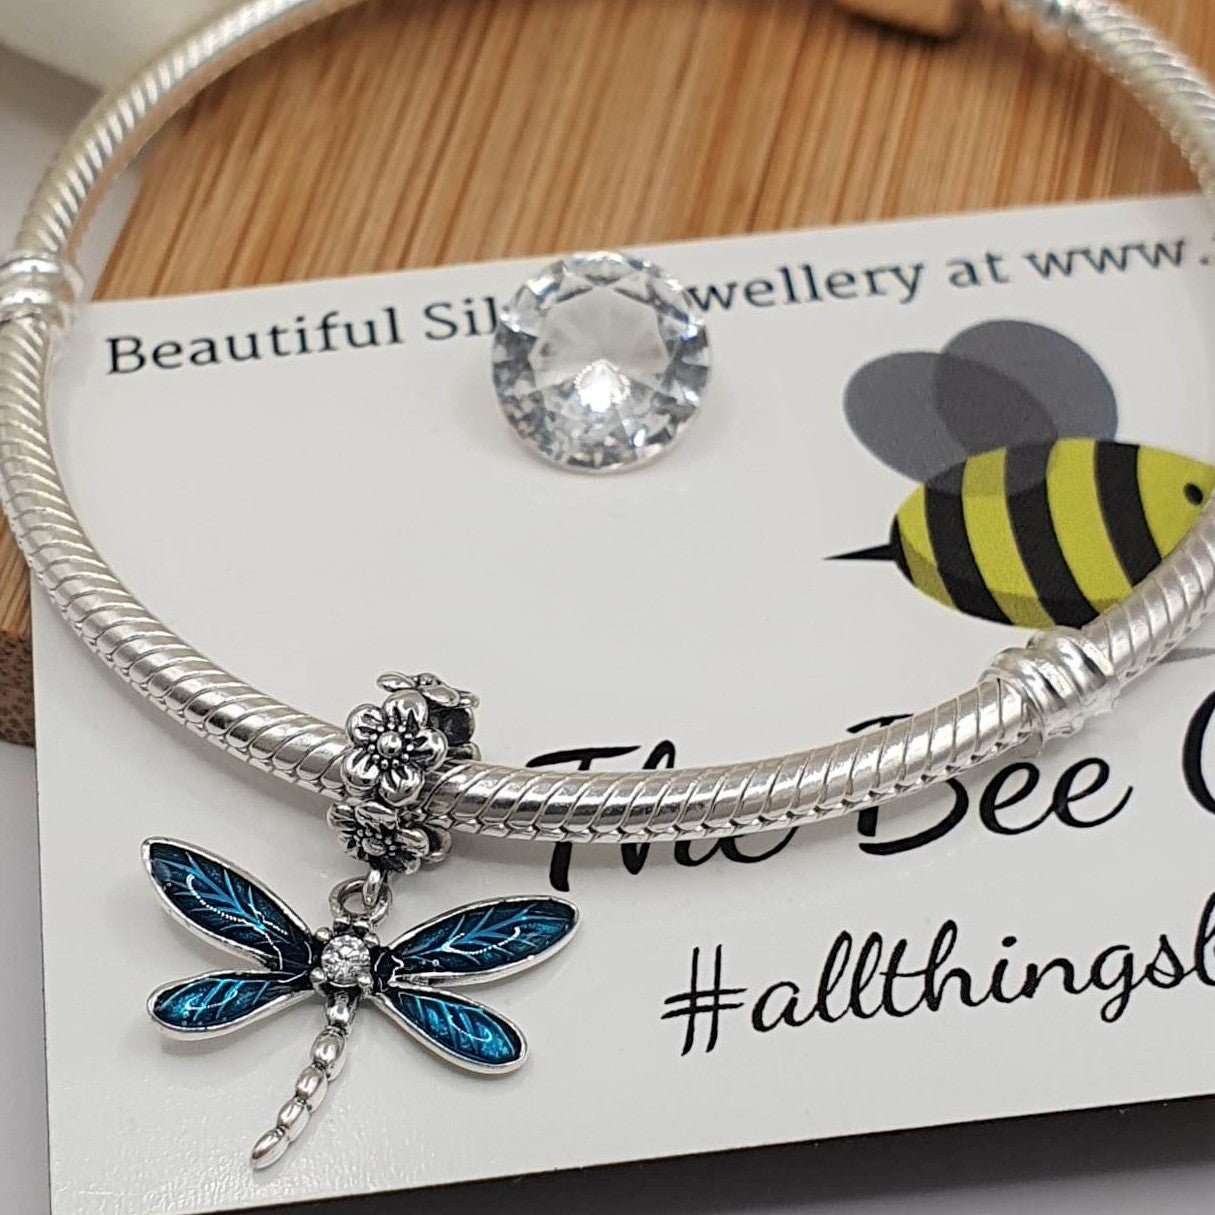 Teal Dragonfly Charm - The Bee Charm